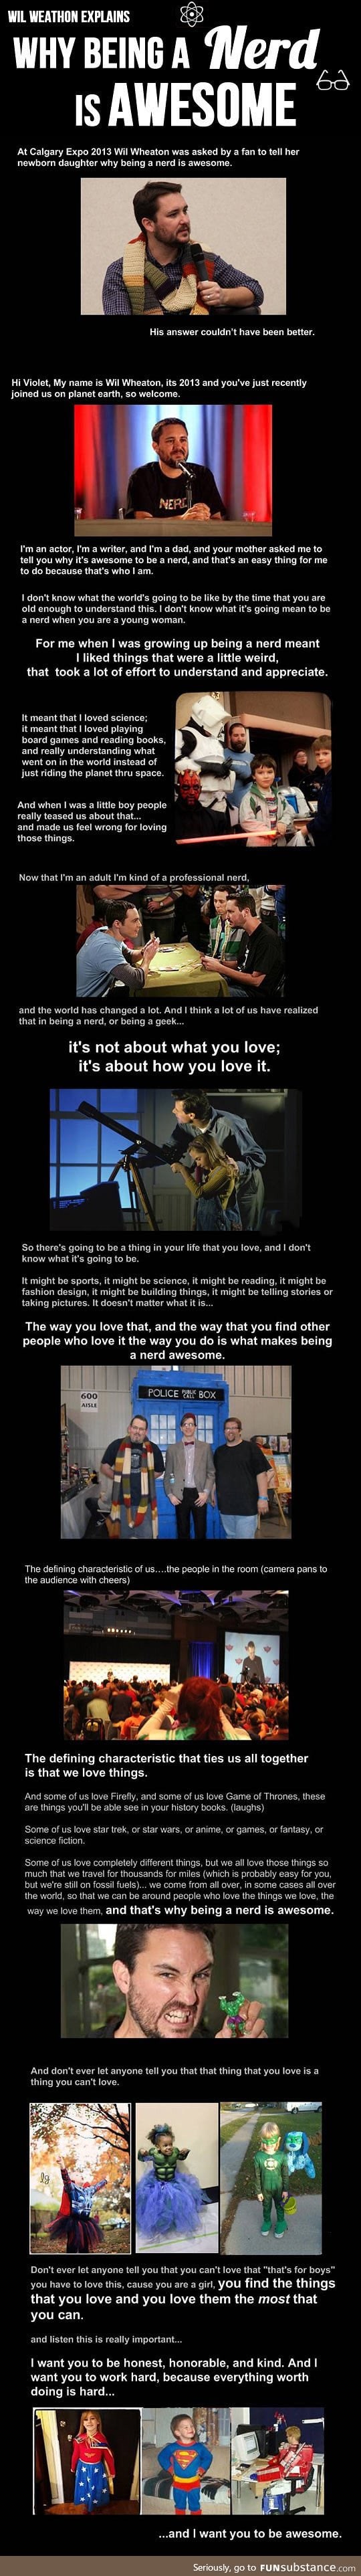 Why being a nerd is awesome